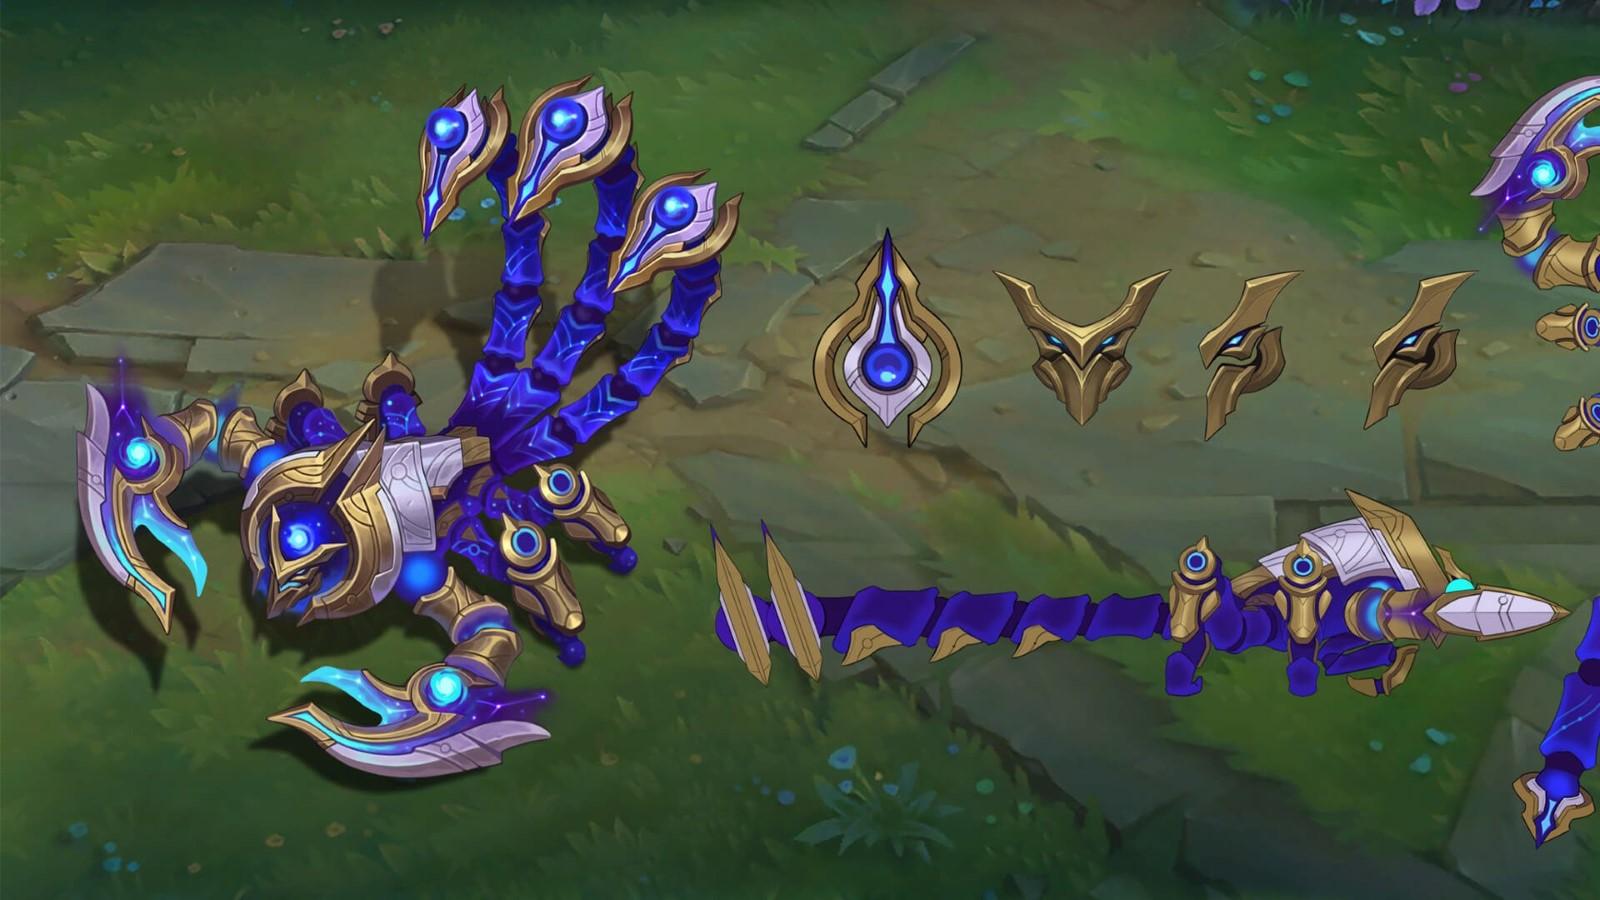 League of Legends Critical Update Required: Ensuring Optimal Gameplay - News